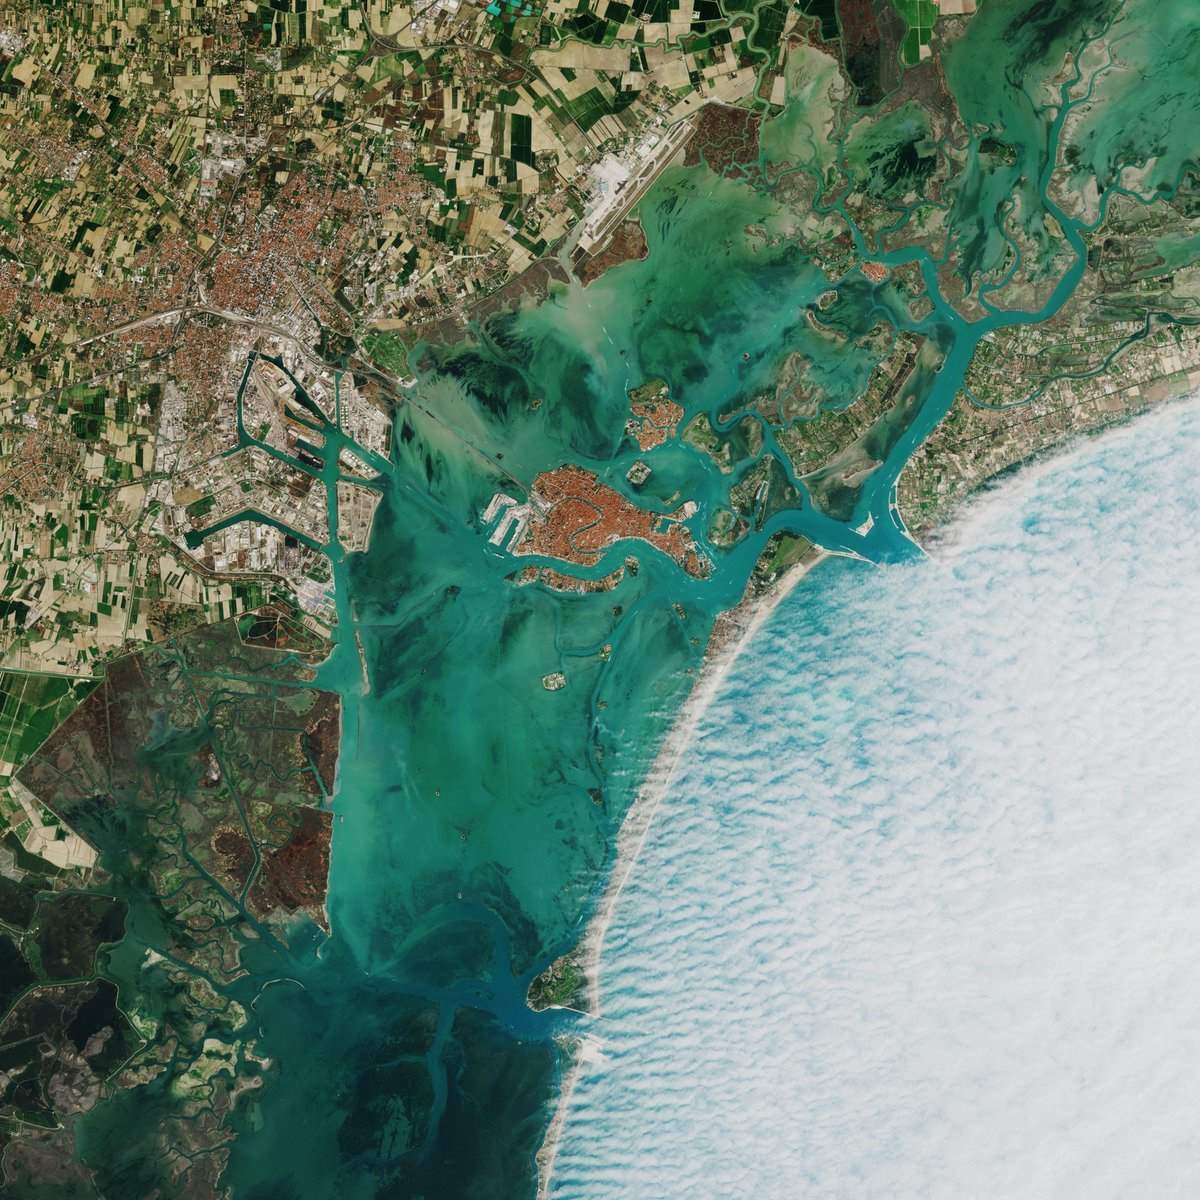 Venice from space